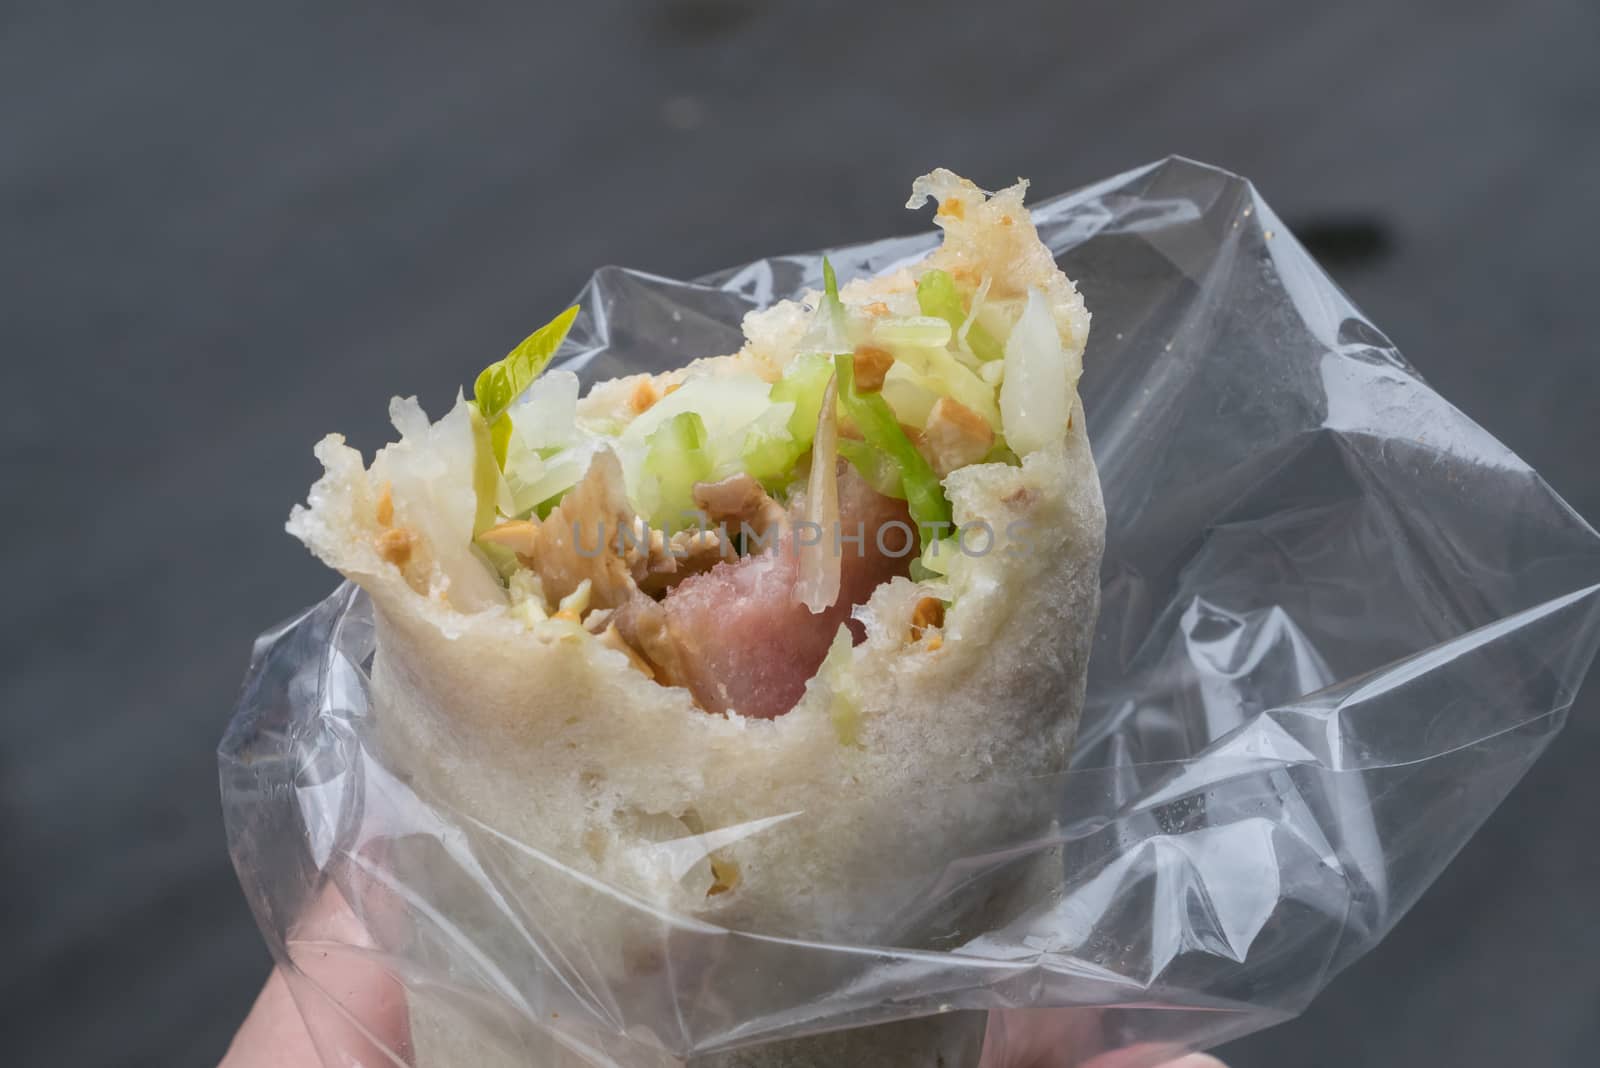 The close up of delicious Taiwan spring roll at food street market in Taipei, Taiwan.